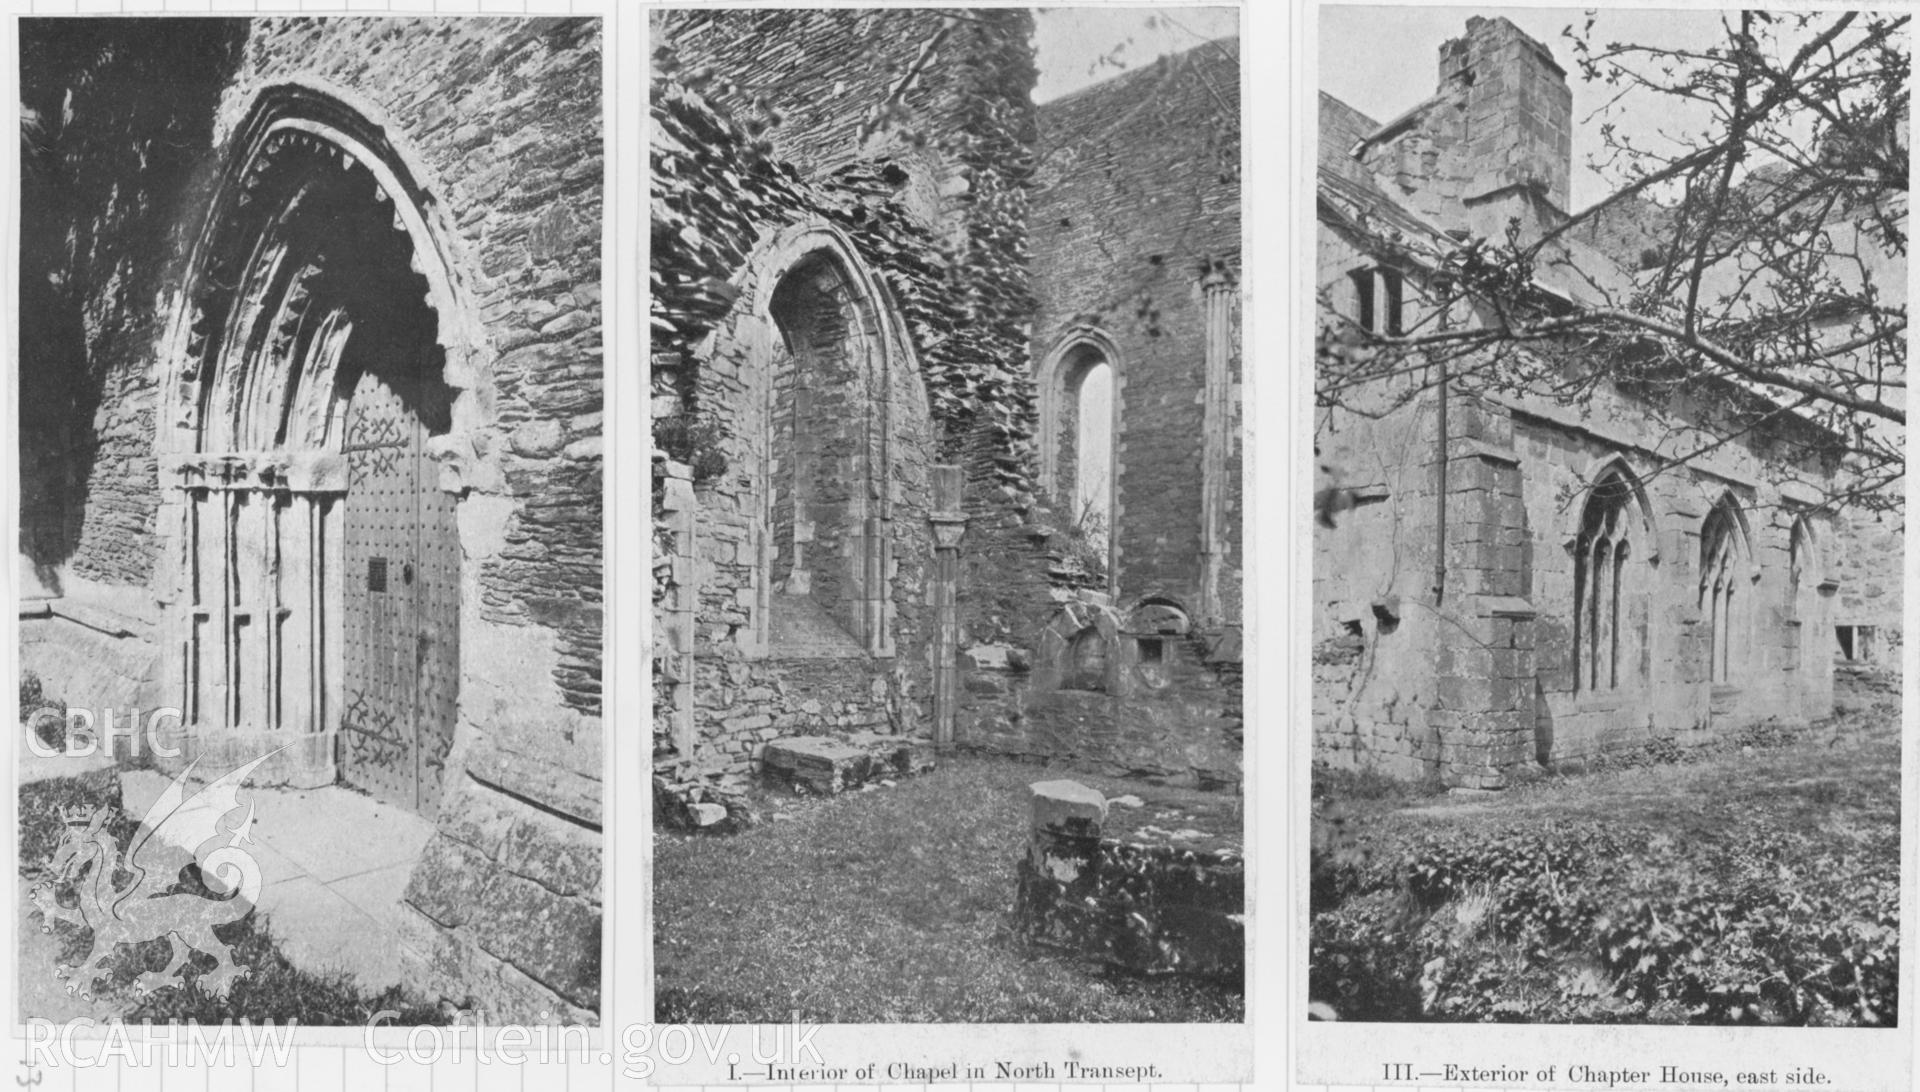 Copy of an illustration showing 3 views of Valle Crucis Abbey.